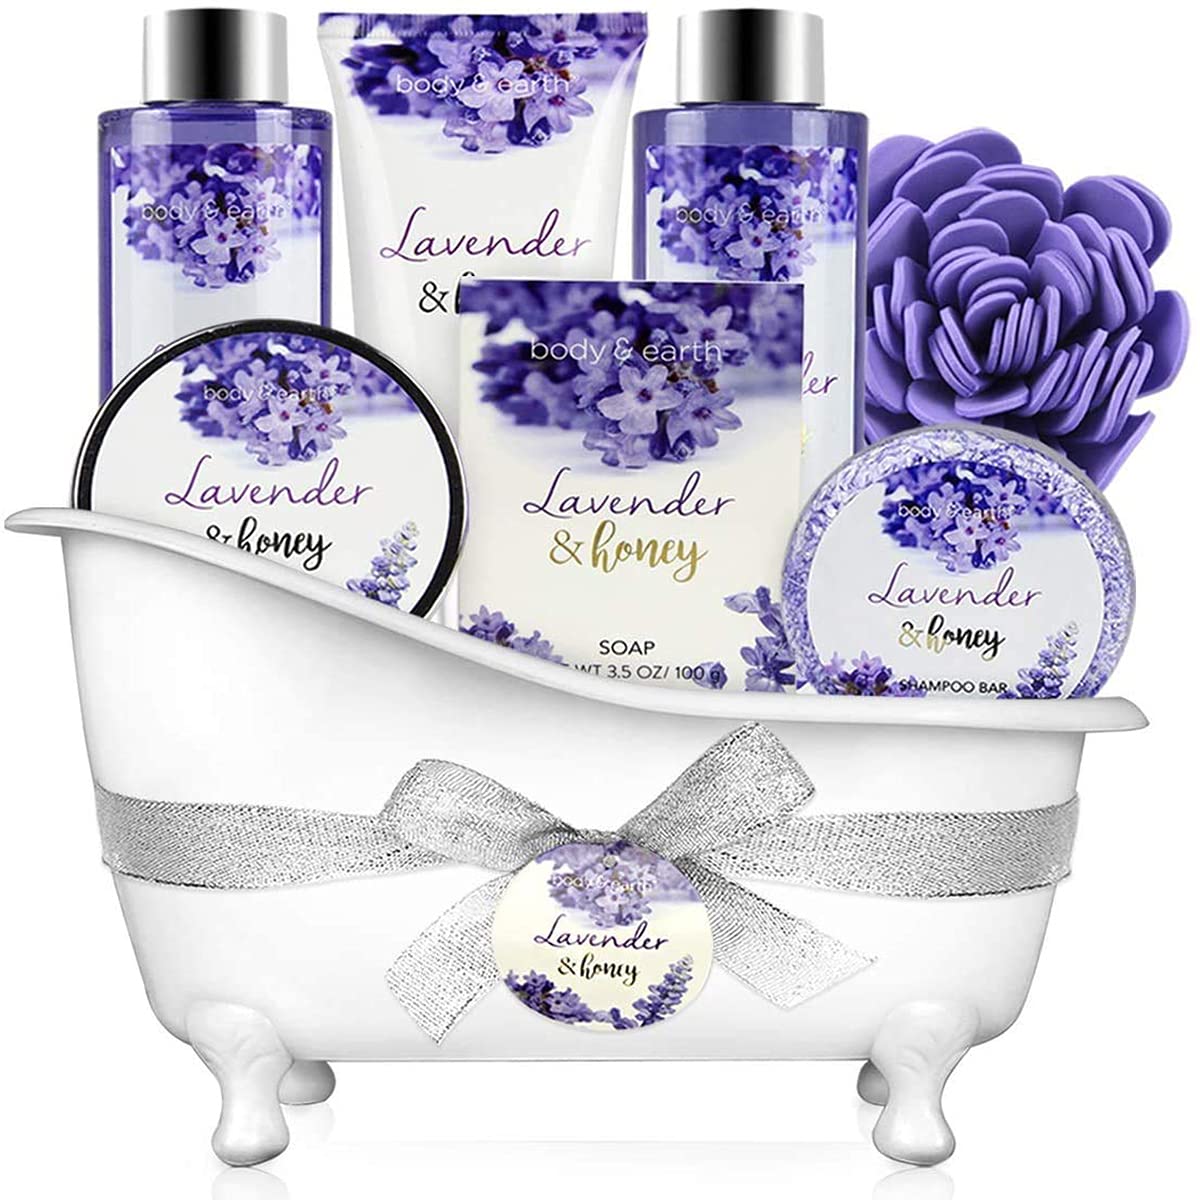 Bath and Body Gift Sets for Women 8 Pcs Lavender and Honey Spa Baskets, Beauty Holiday Birthday Gifts - image 1 of 8